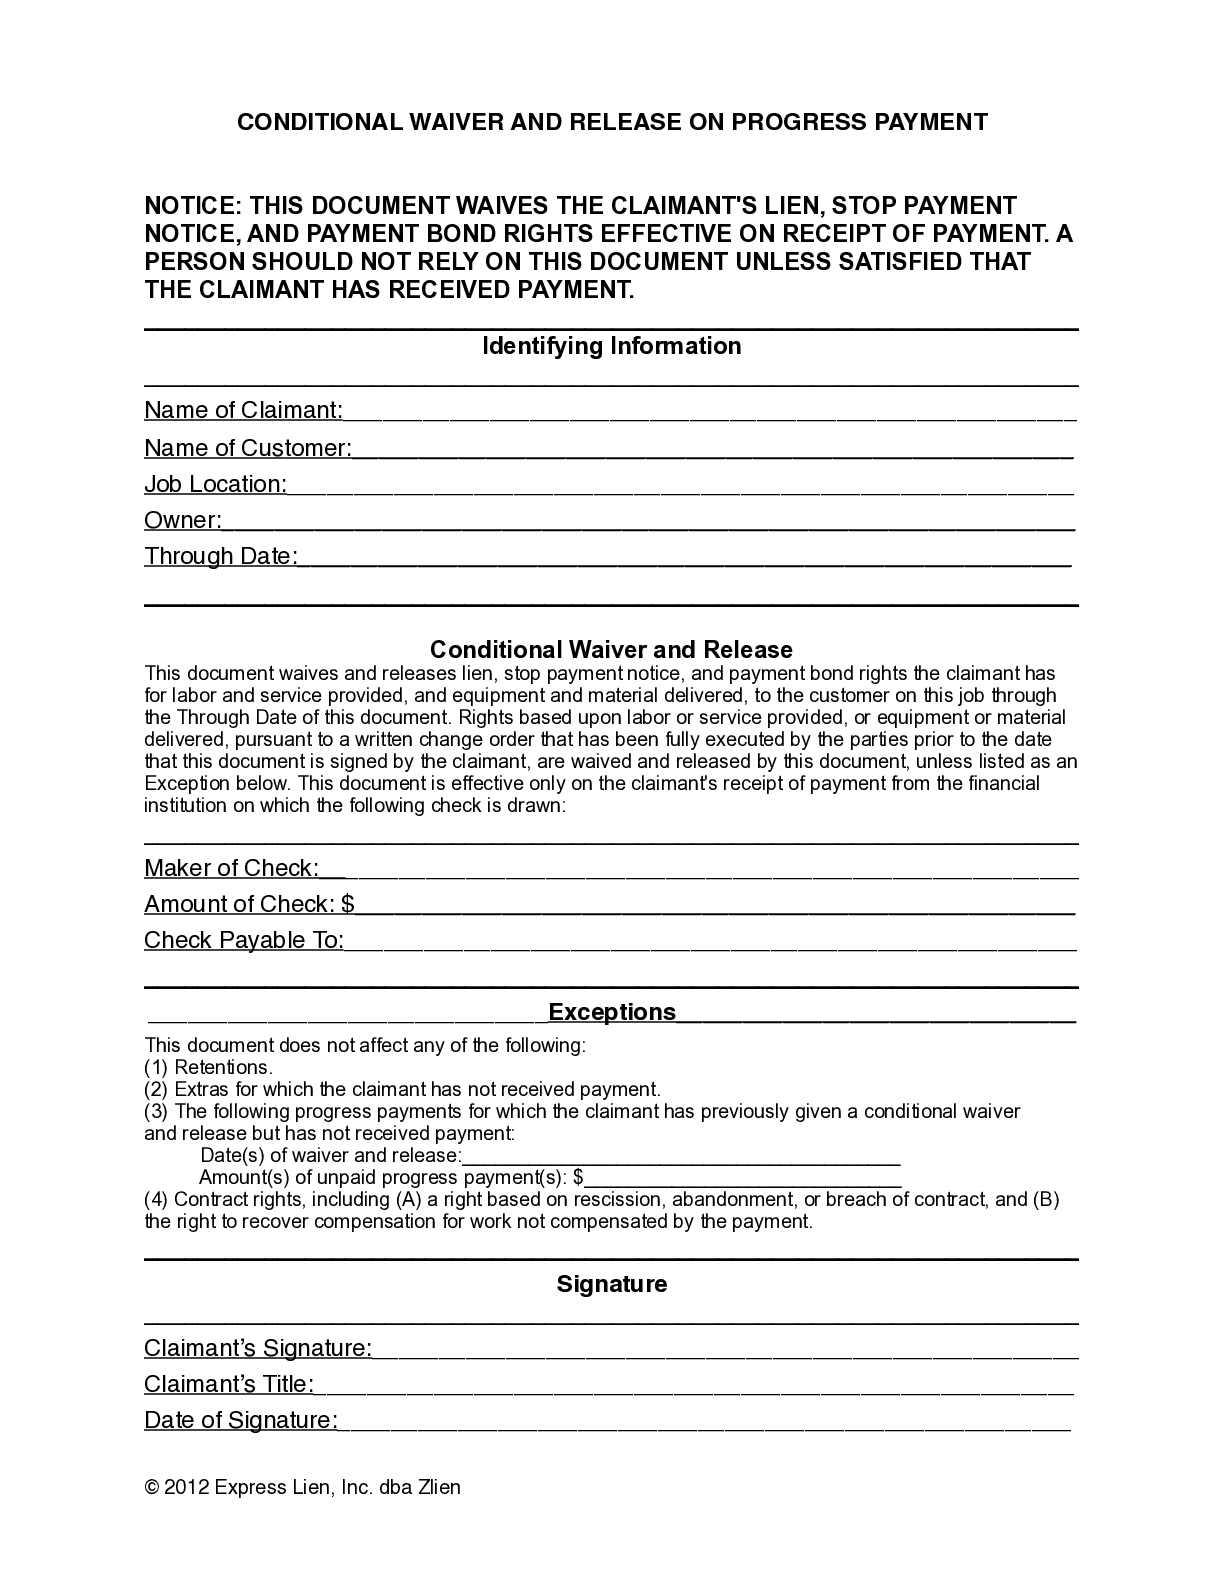 Delaware Partial Conditional Lien Waiver Form - free from